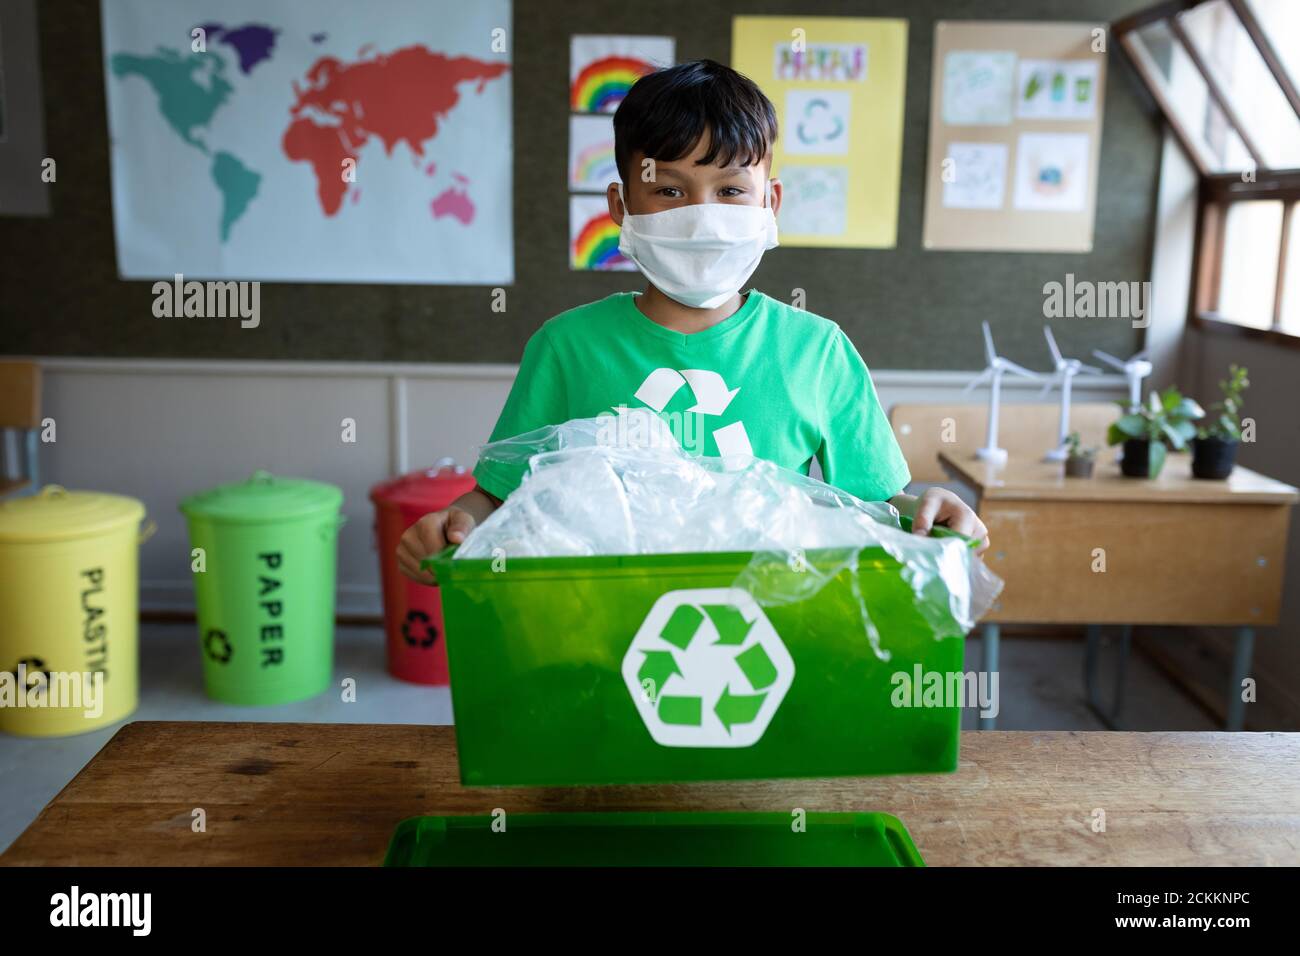 Portrait of boy wearing face mask holding a recycle container in class at school Stock Photo